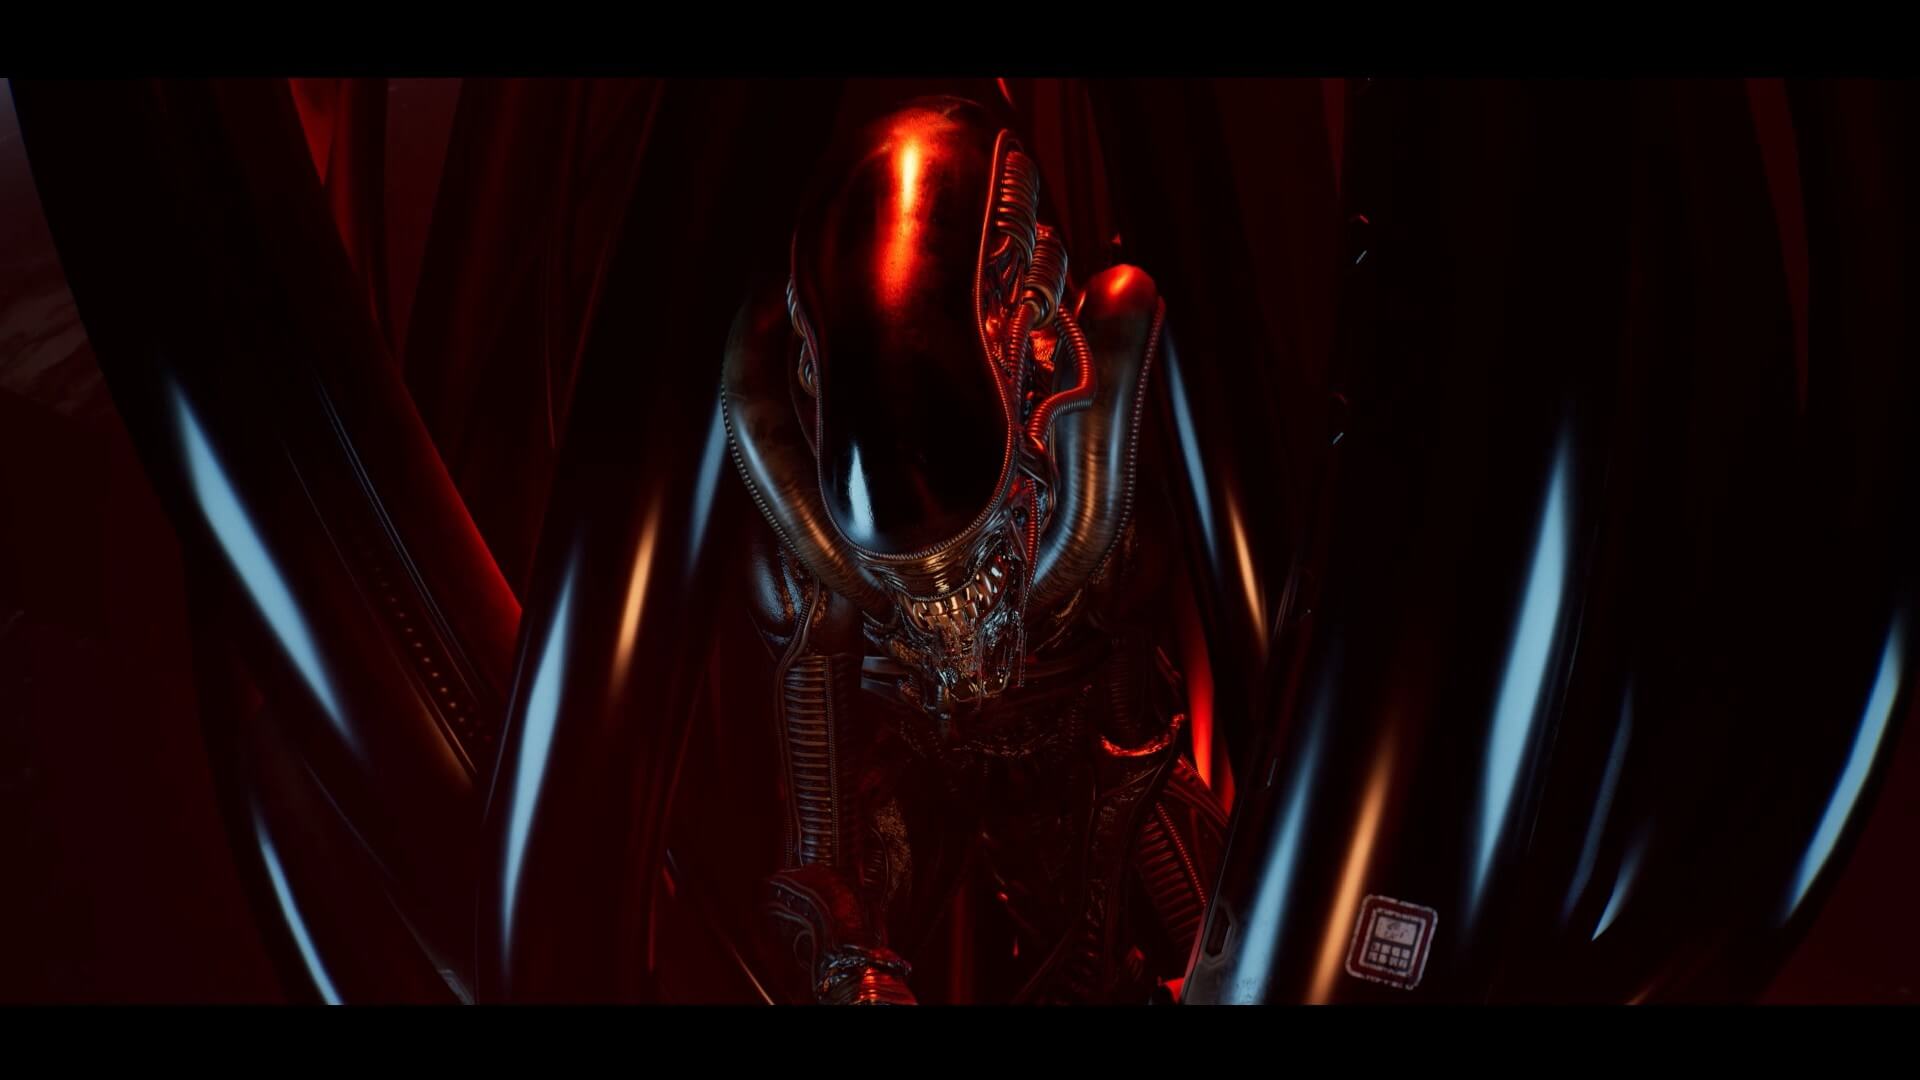 A red tint on the xenomorph hiding amongst some large rubber tubing above a computer is a tactic Xenomorphs are commonly known to use for hiding.